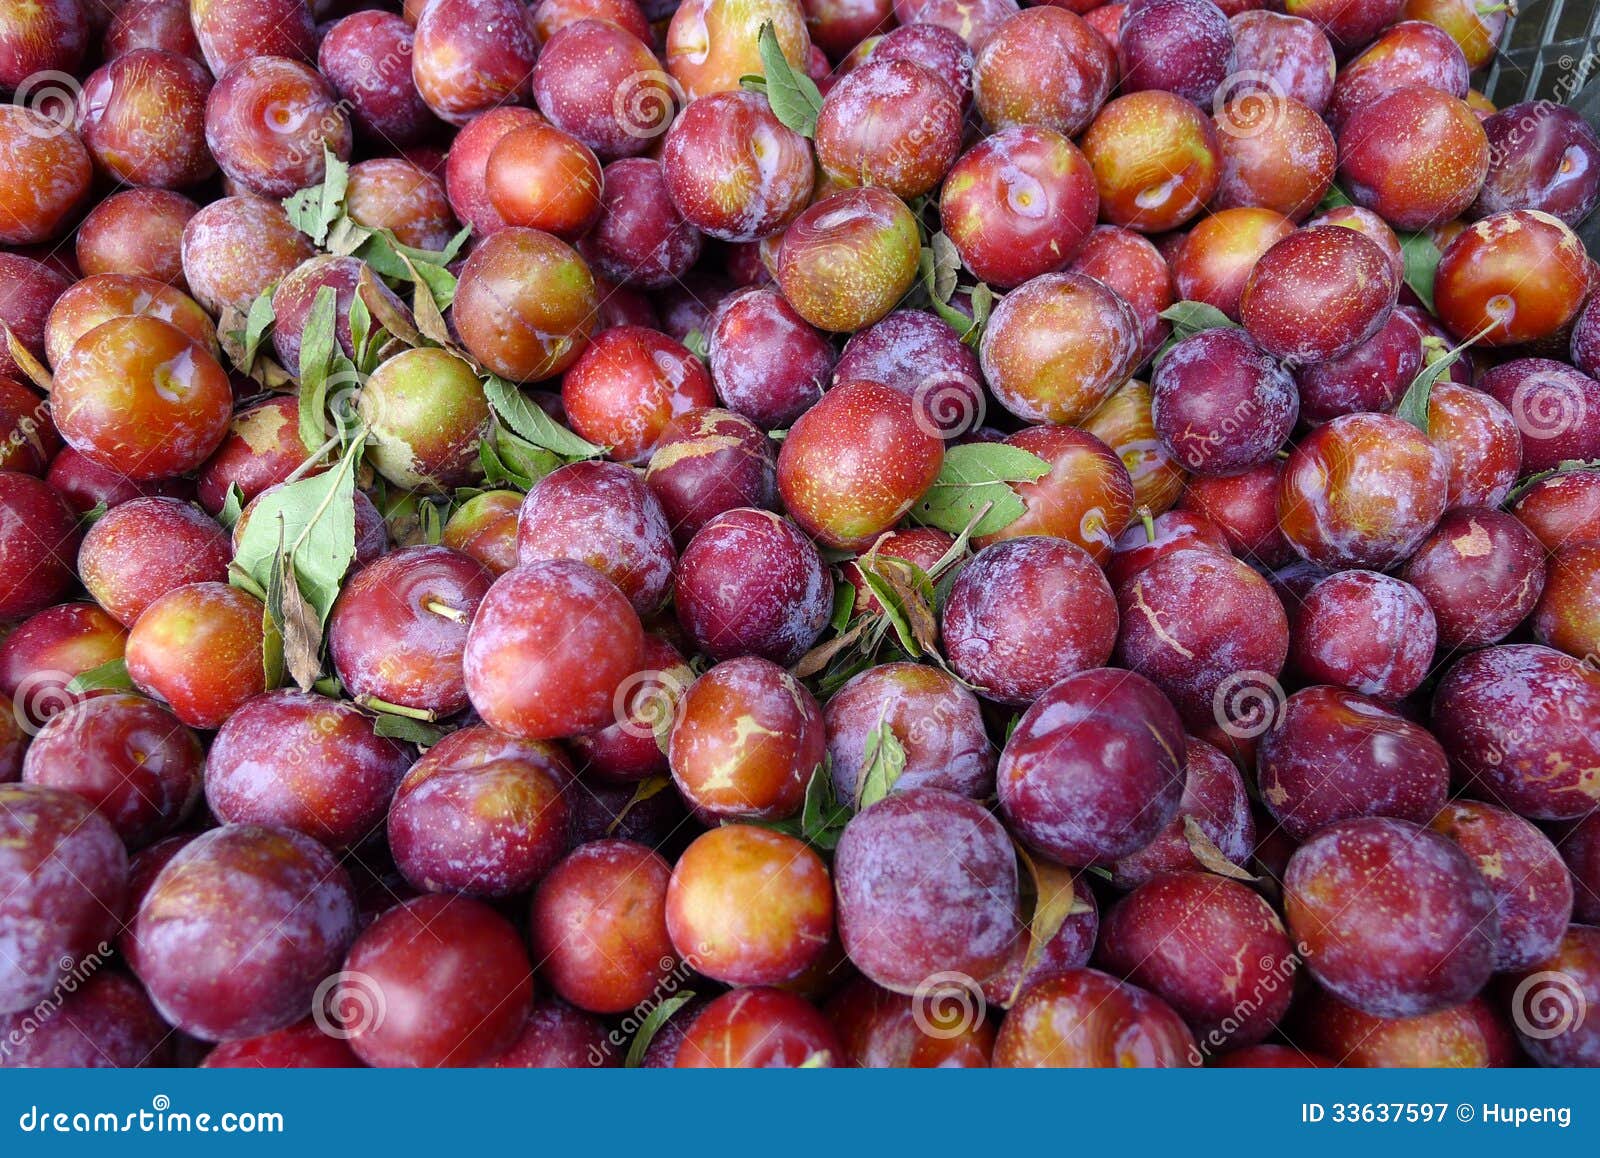 Sweet plums stock image. Image of drops, garden, color - 33637597